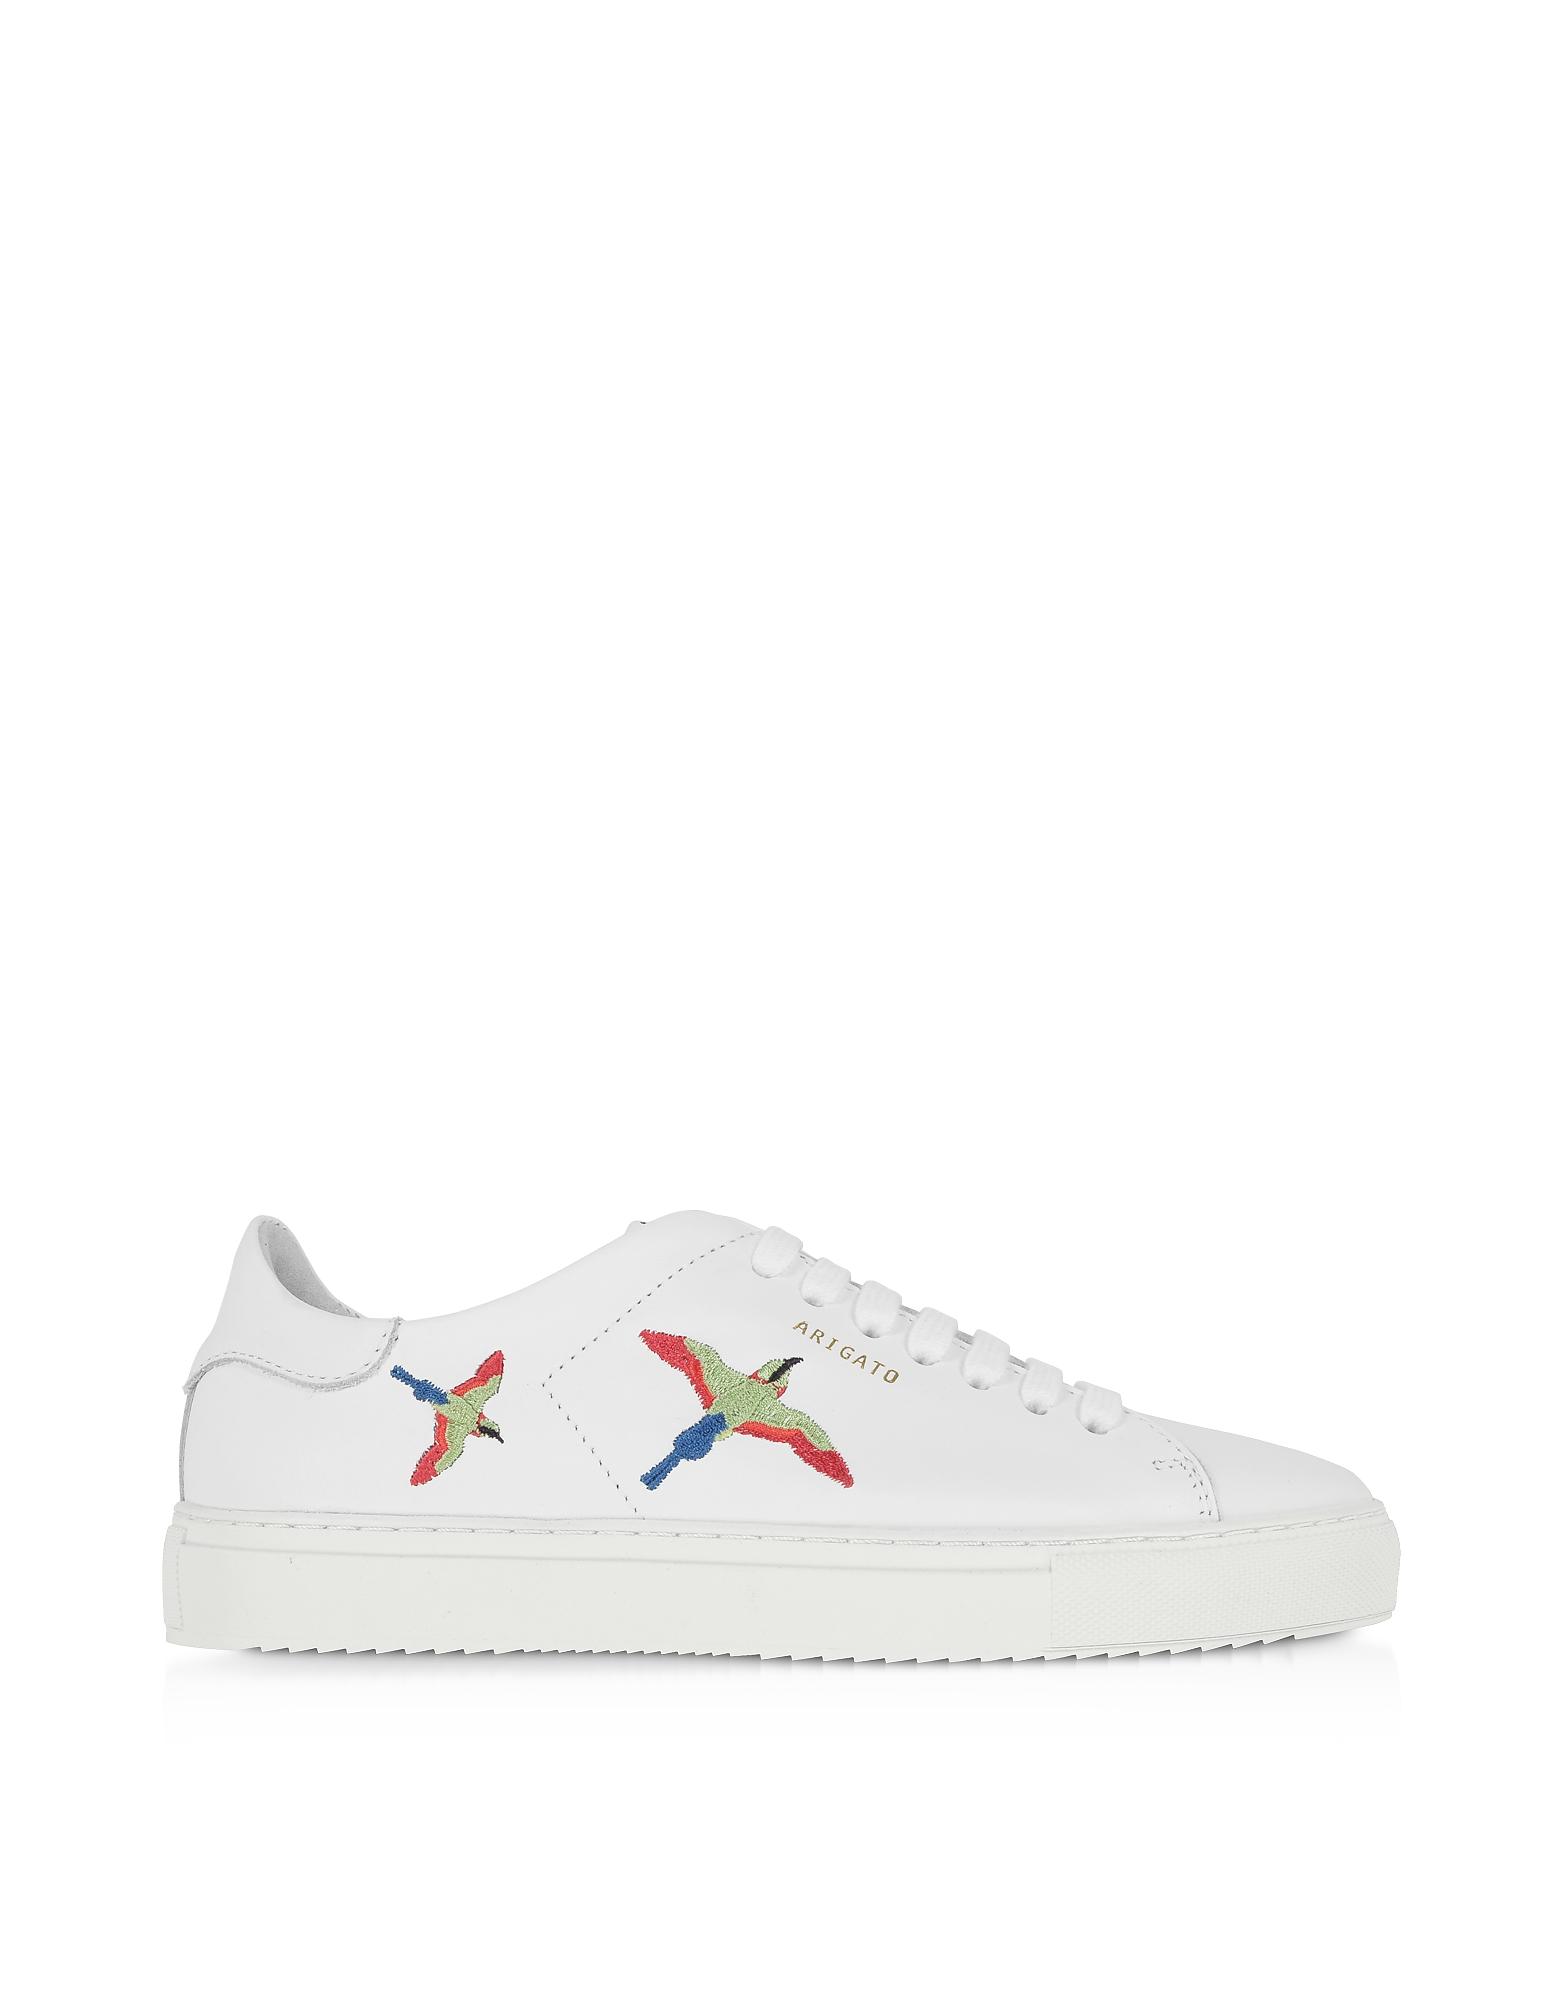 Axel Arigato Clean 90 Bird Embroidery Leather Trainers in White - Save ...